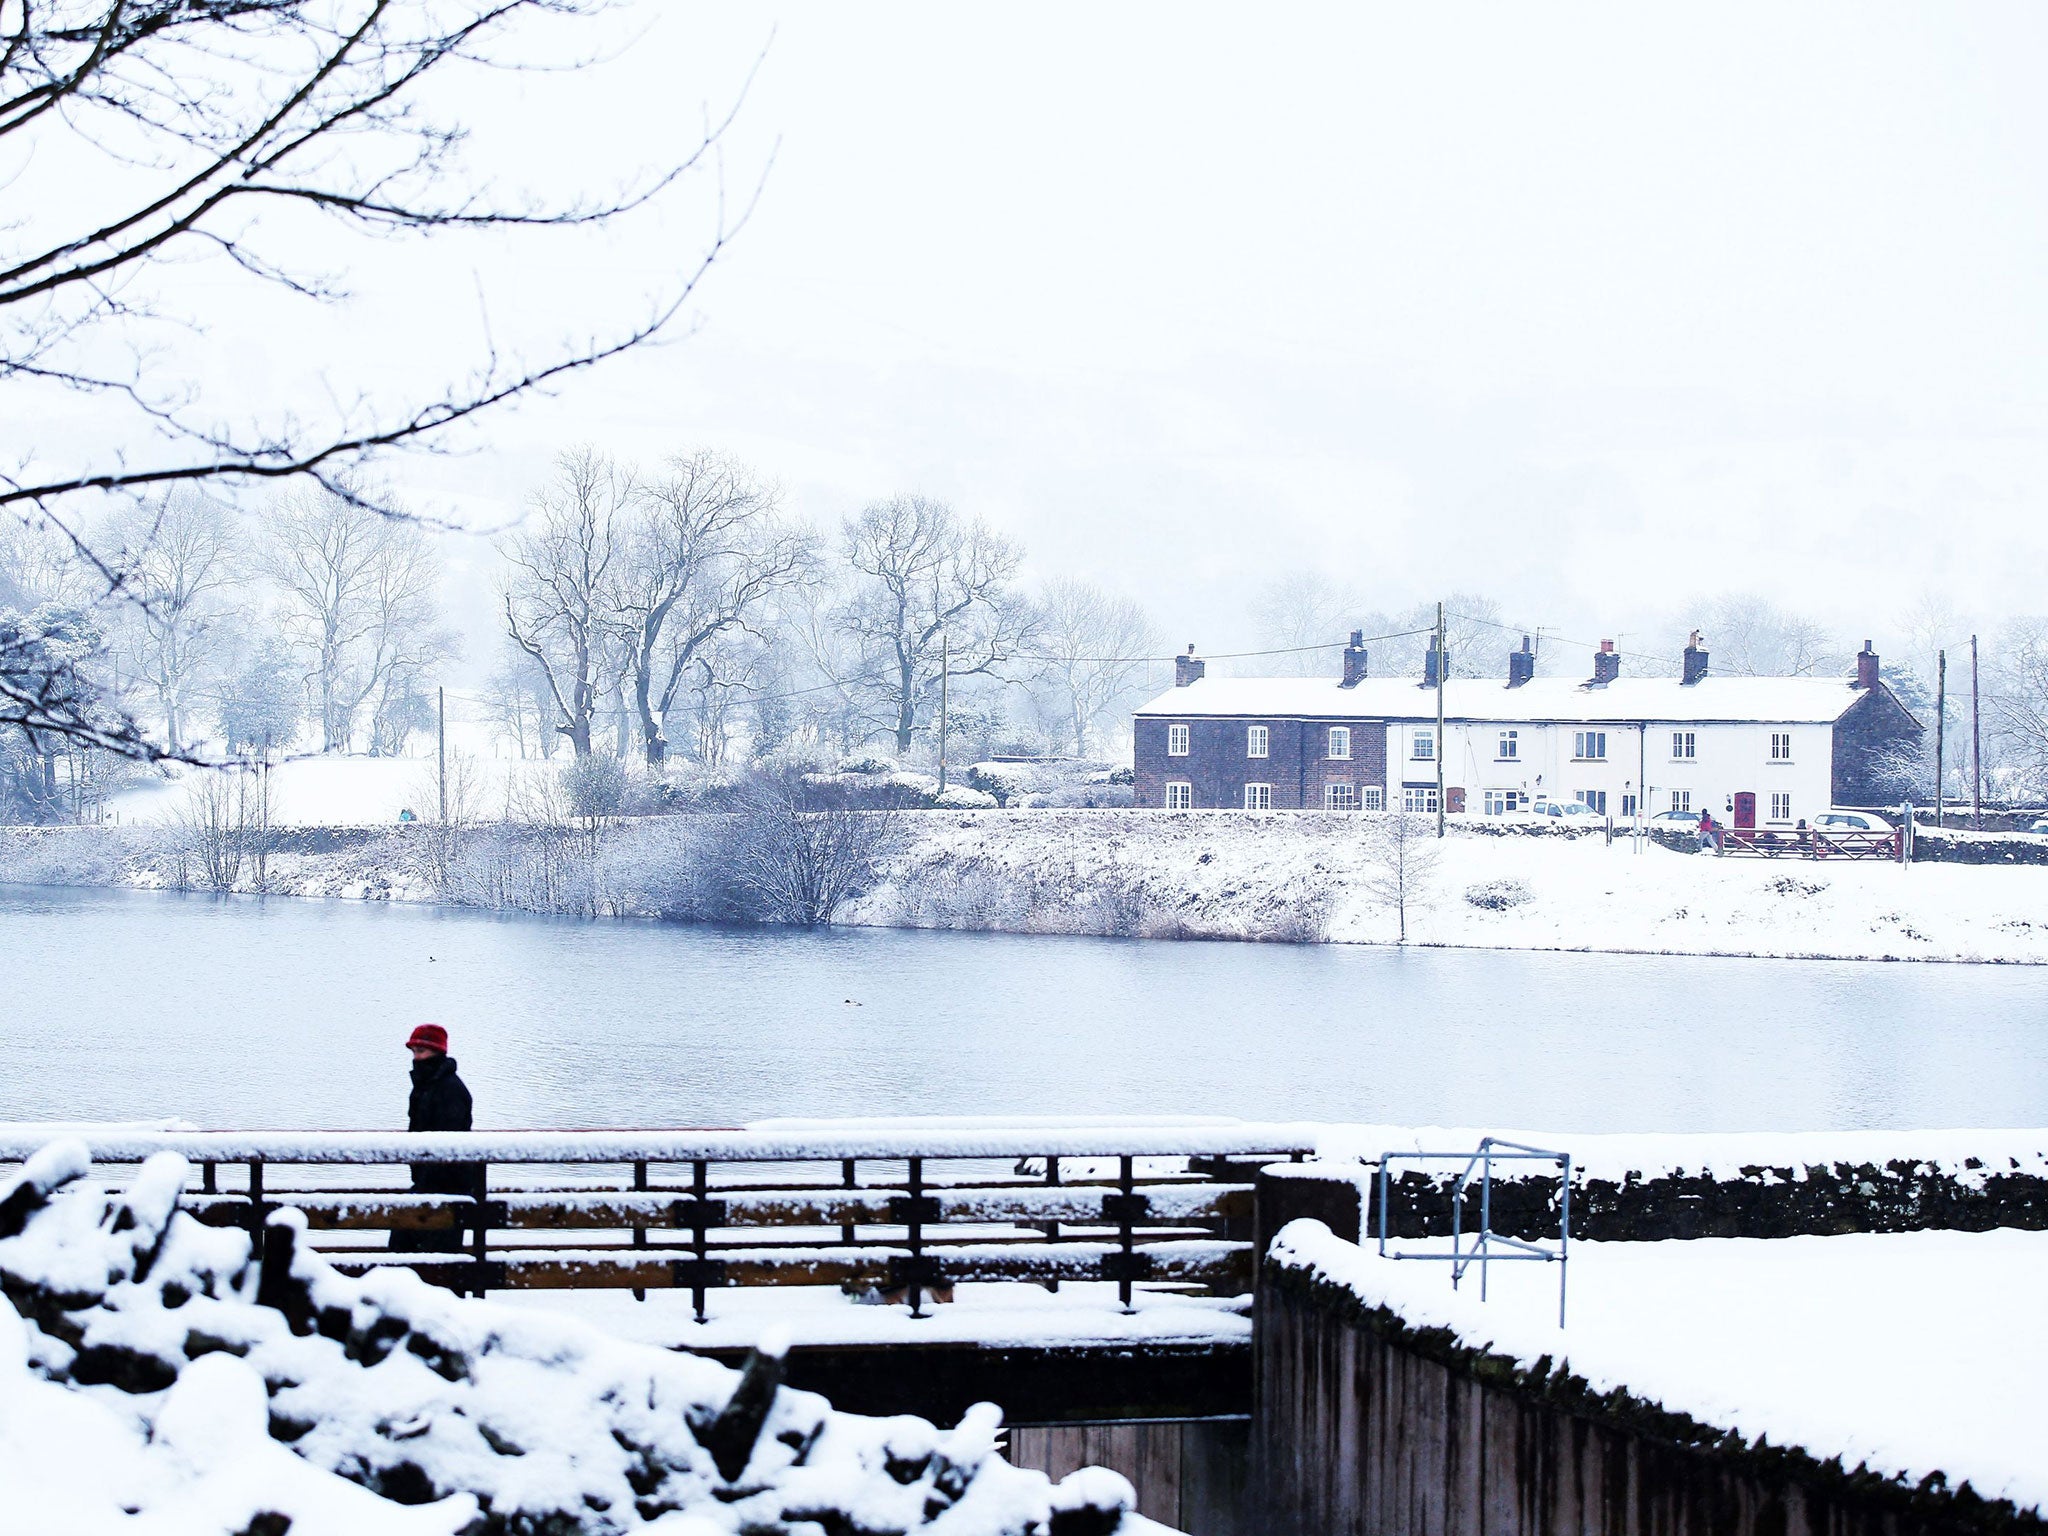 A woman walks over the bridge covered in snow, in Langley